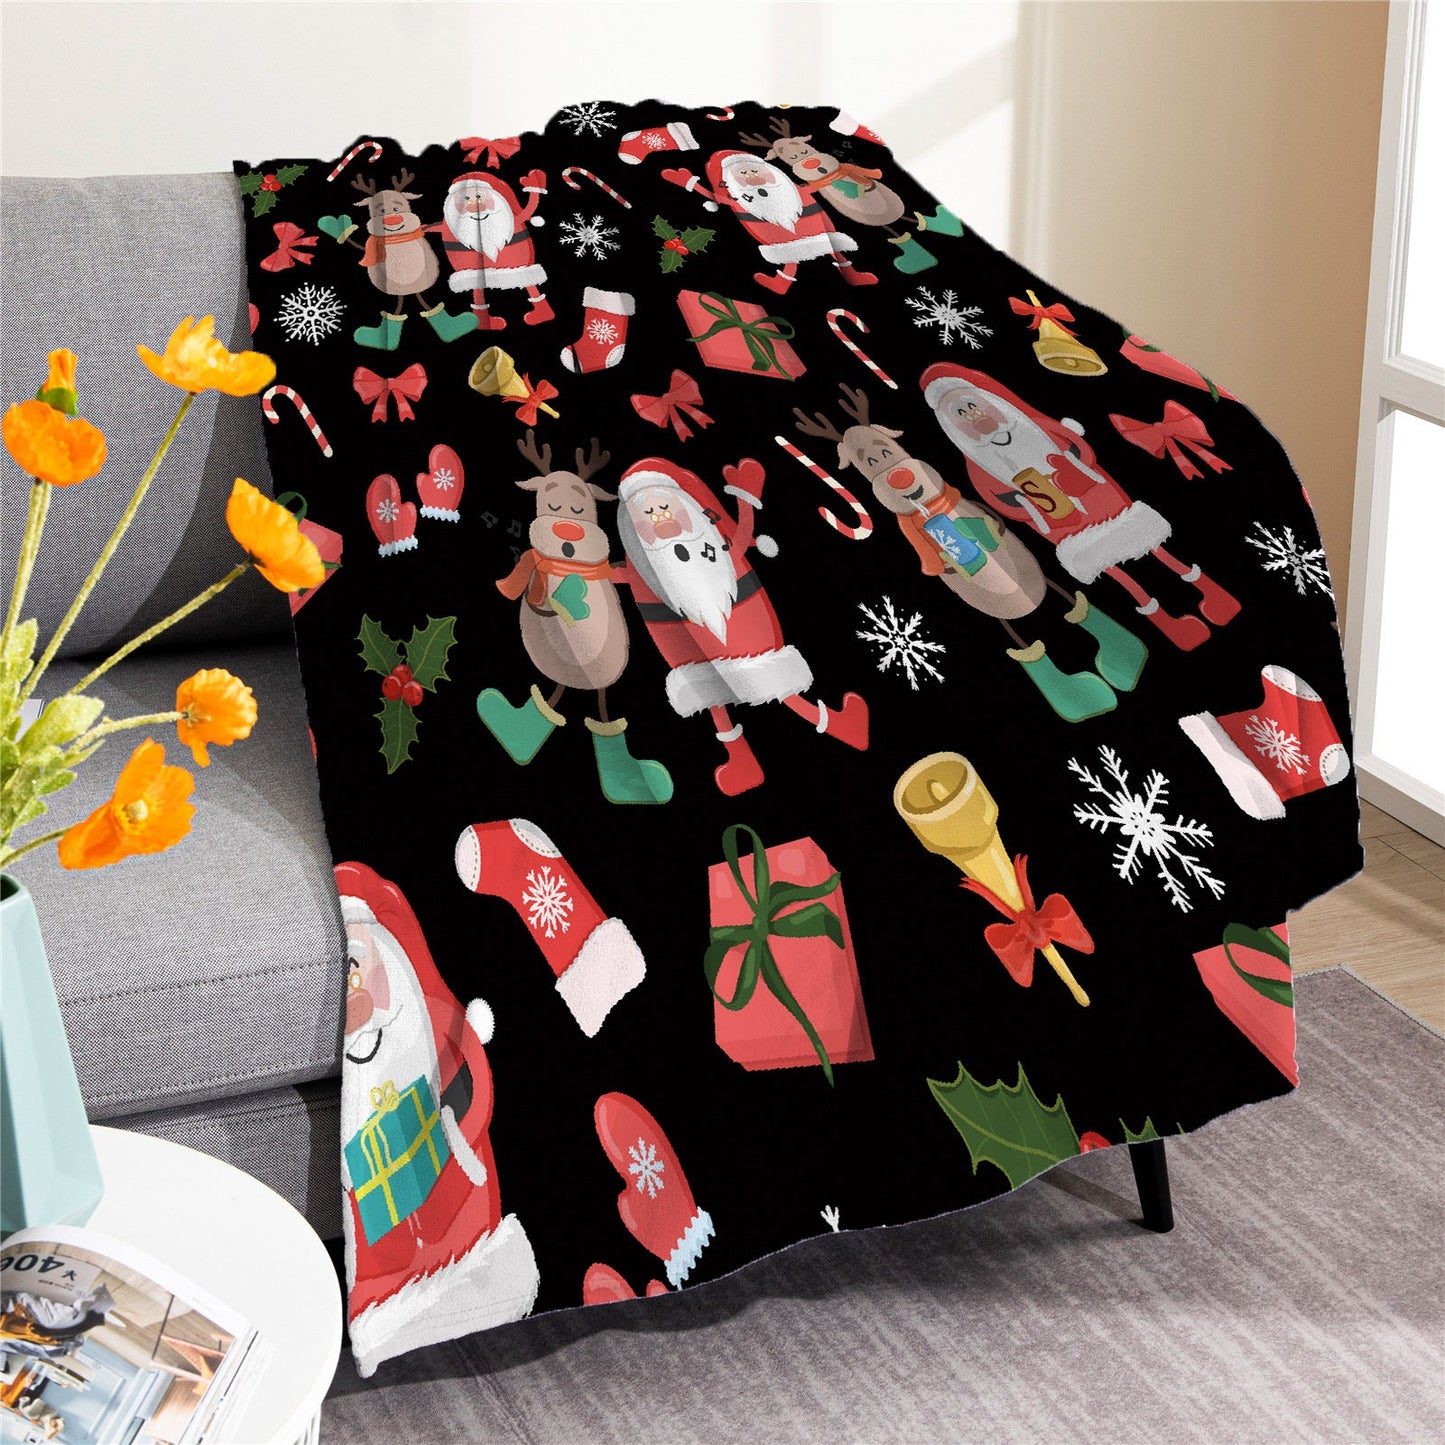 Merry Christmas Soft Fleece Throw Blankets-Blankets-M20220916-4-50*60 inches-Free Shipping at meselling99